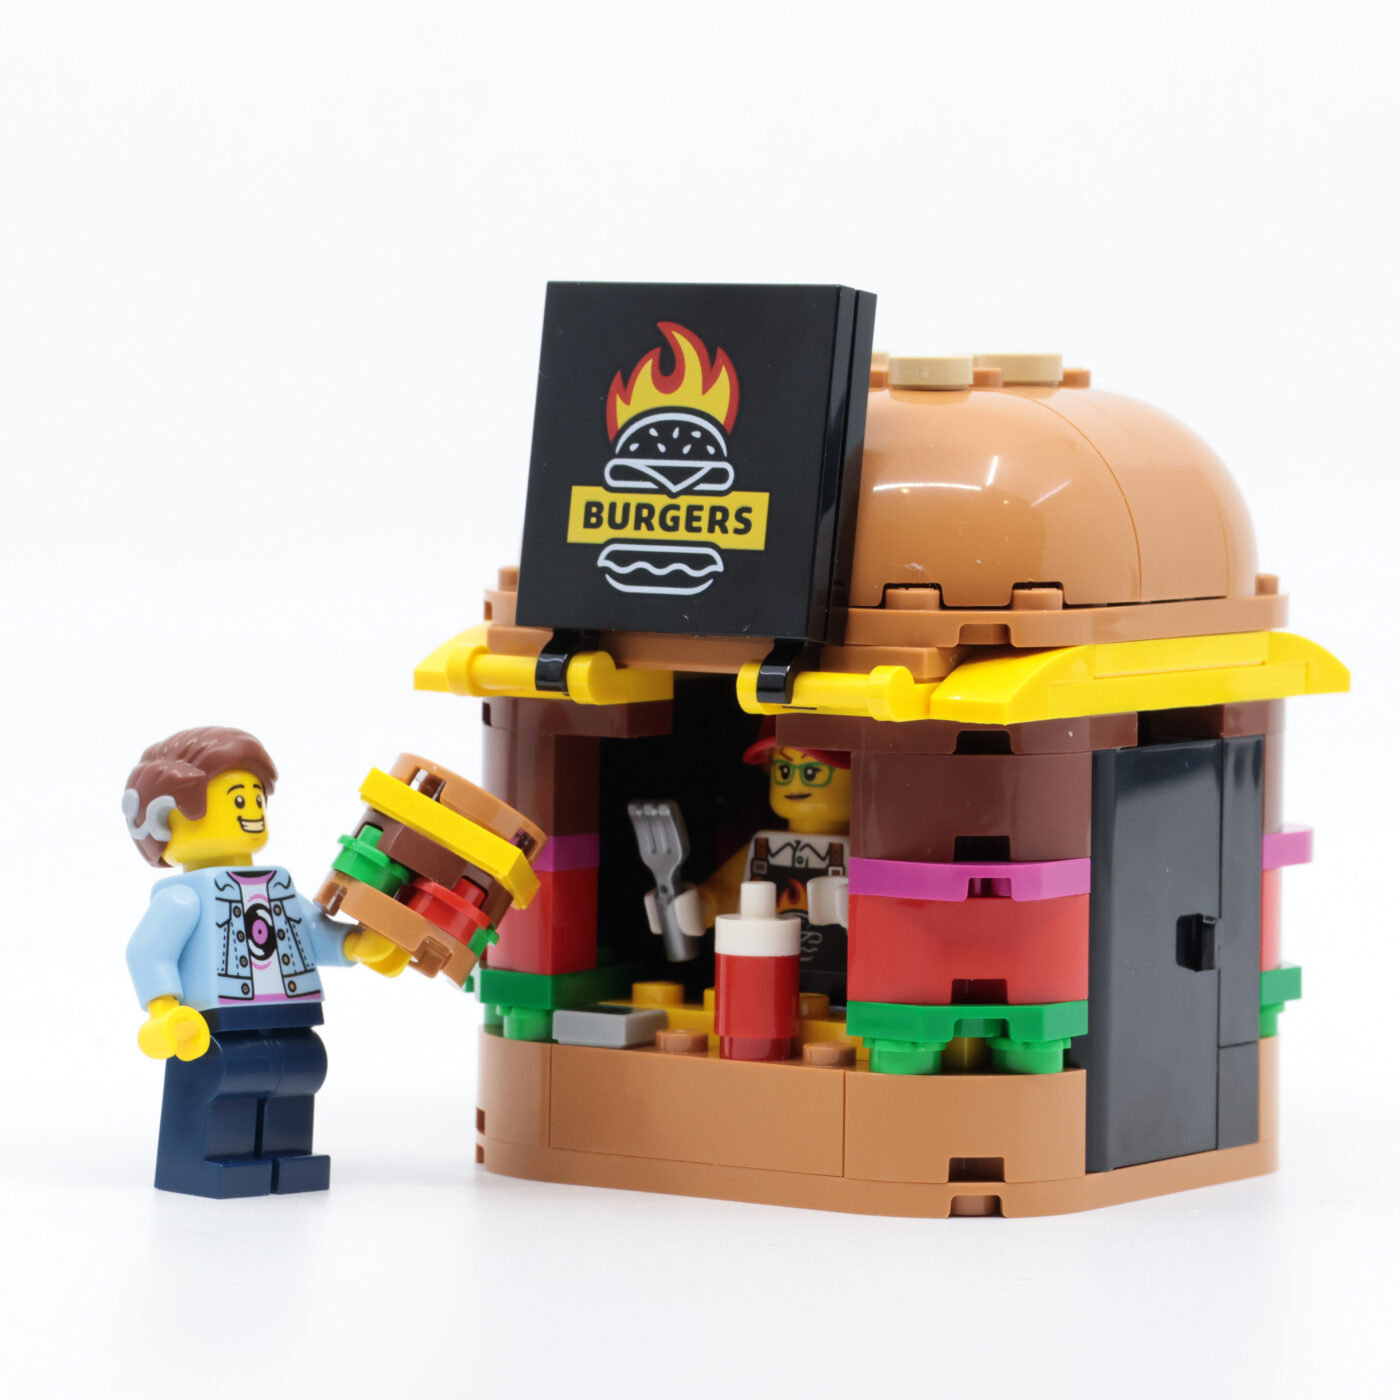 Review: LEGO 60404 Burger Truck13